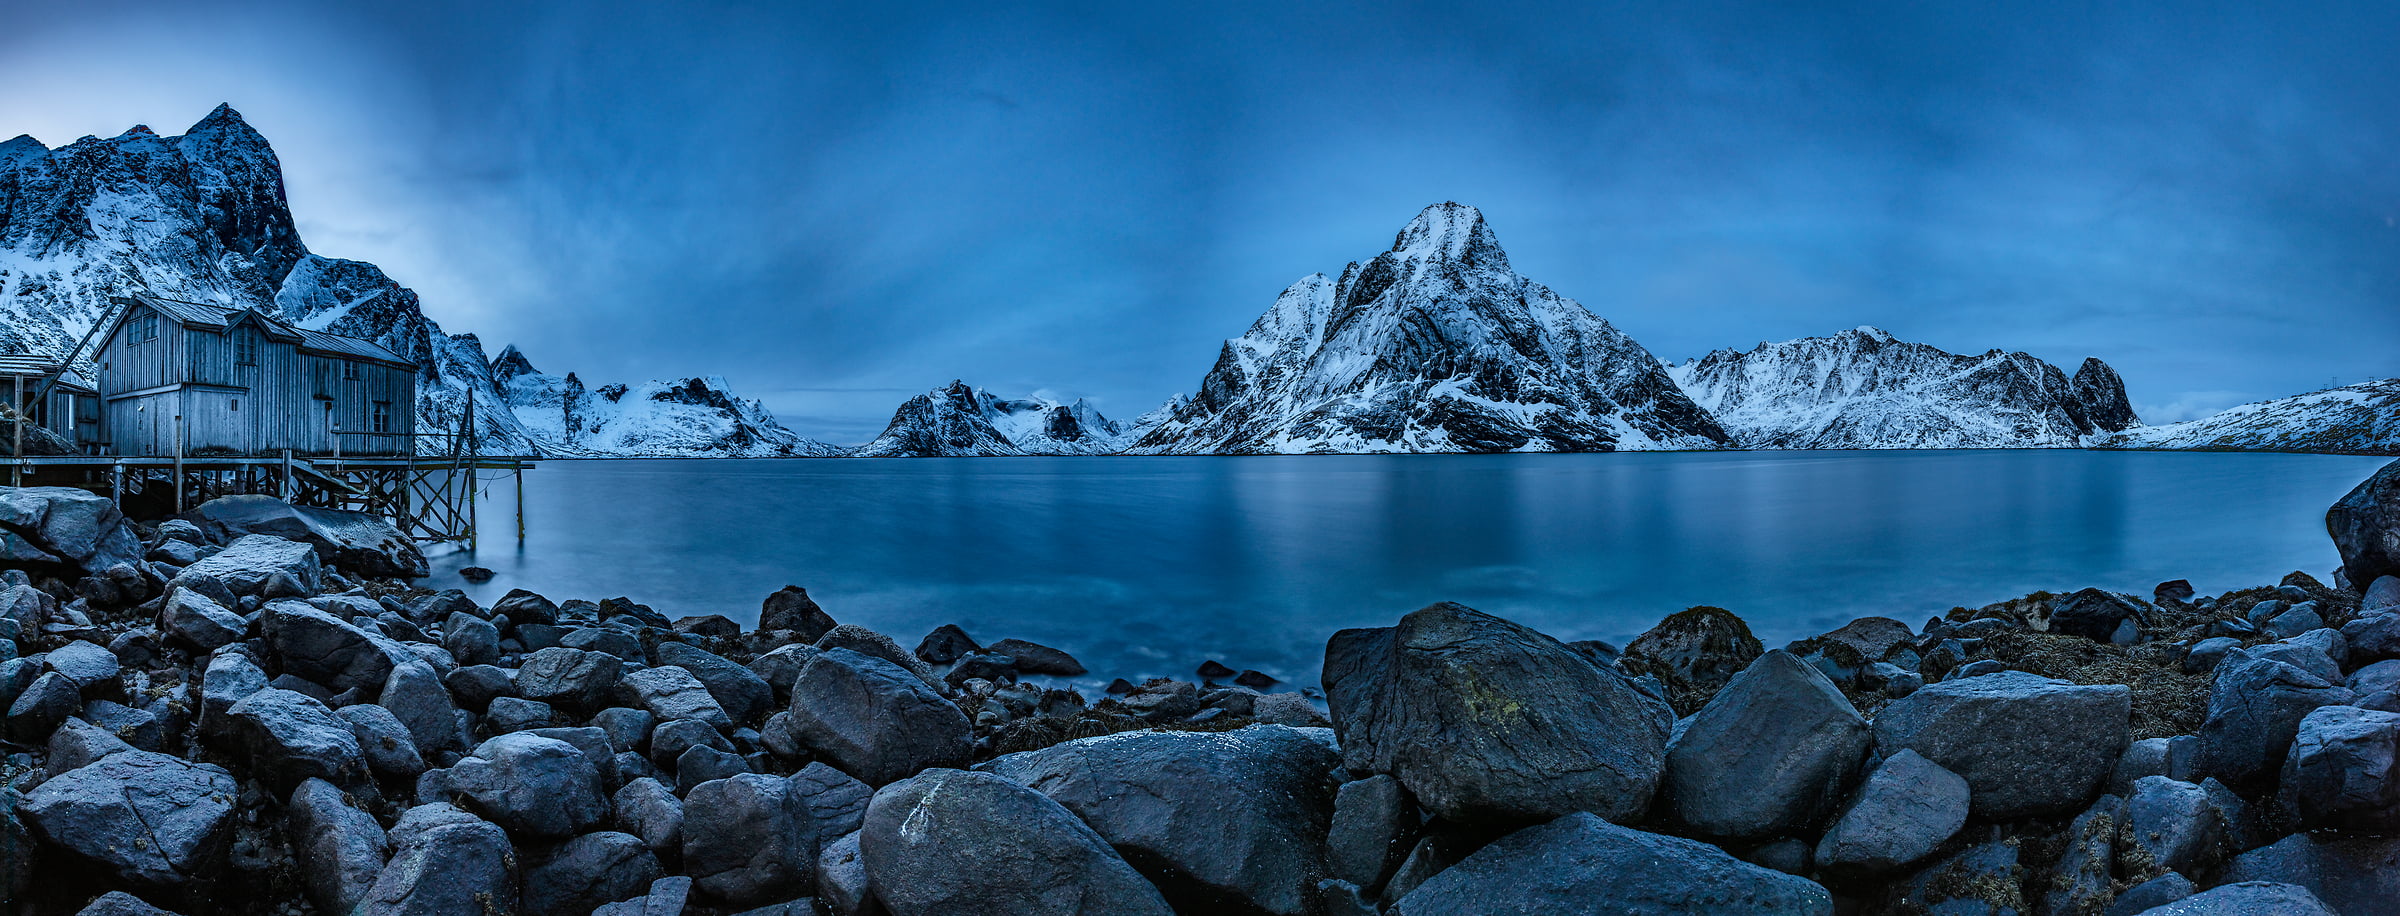 114 megapixels! A very high resolution, large-format VAST photo print of a mountain lake landscape in winter; photograph created by Alfred Feil in Moskenes Island, Lofoten, Norway.